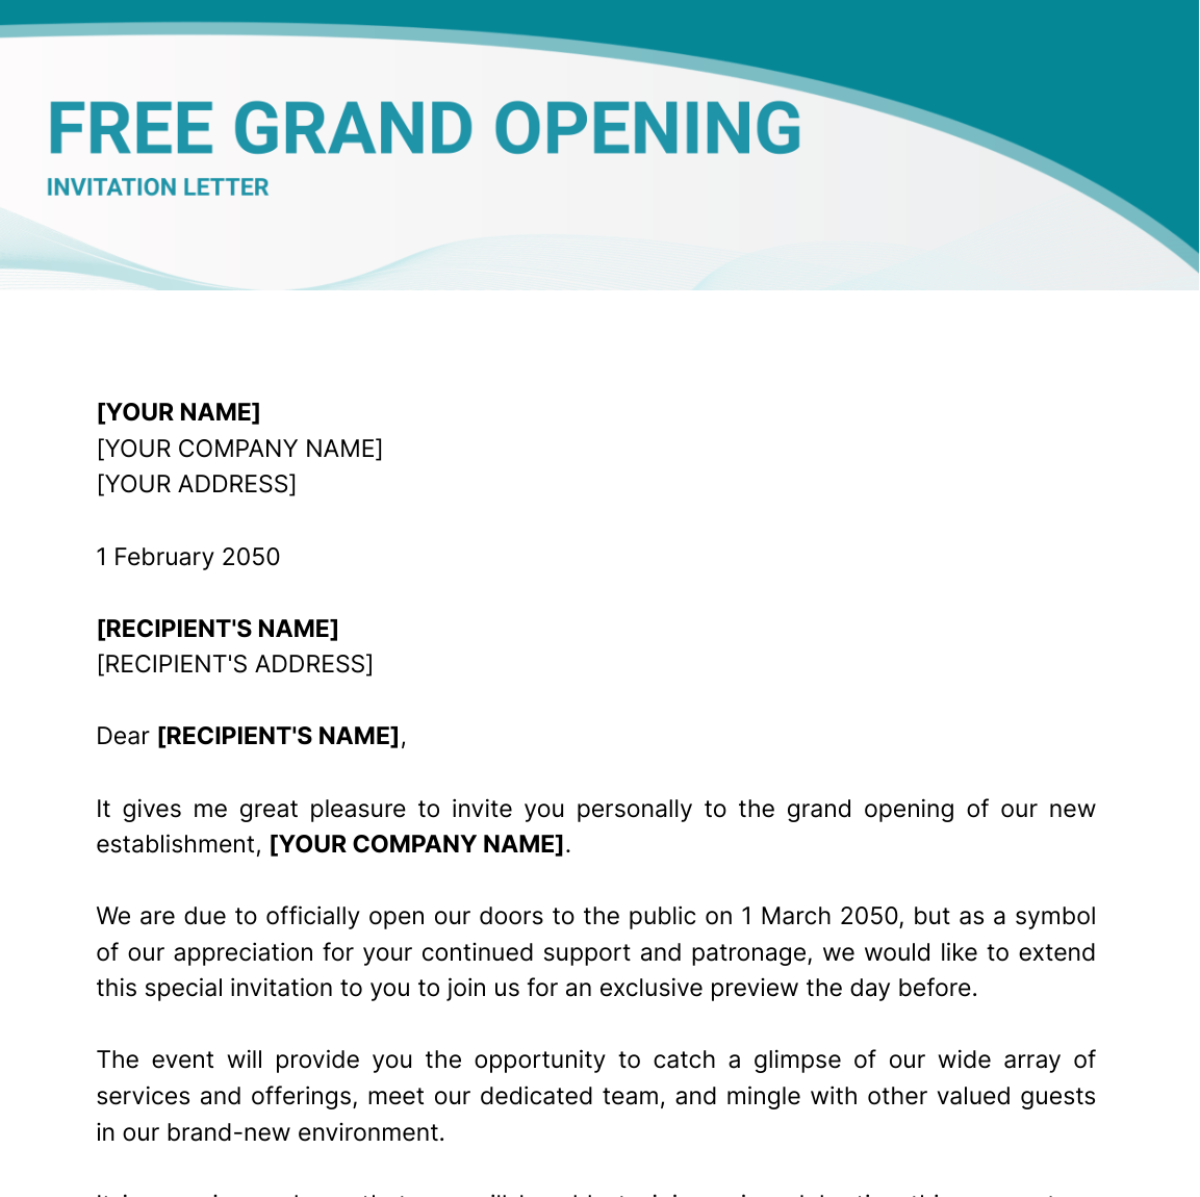 Grand Opening Invitation Letter Template